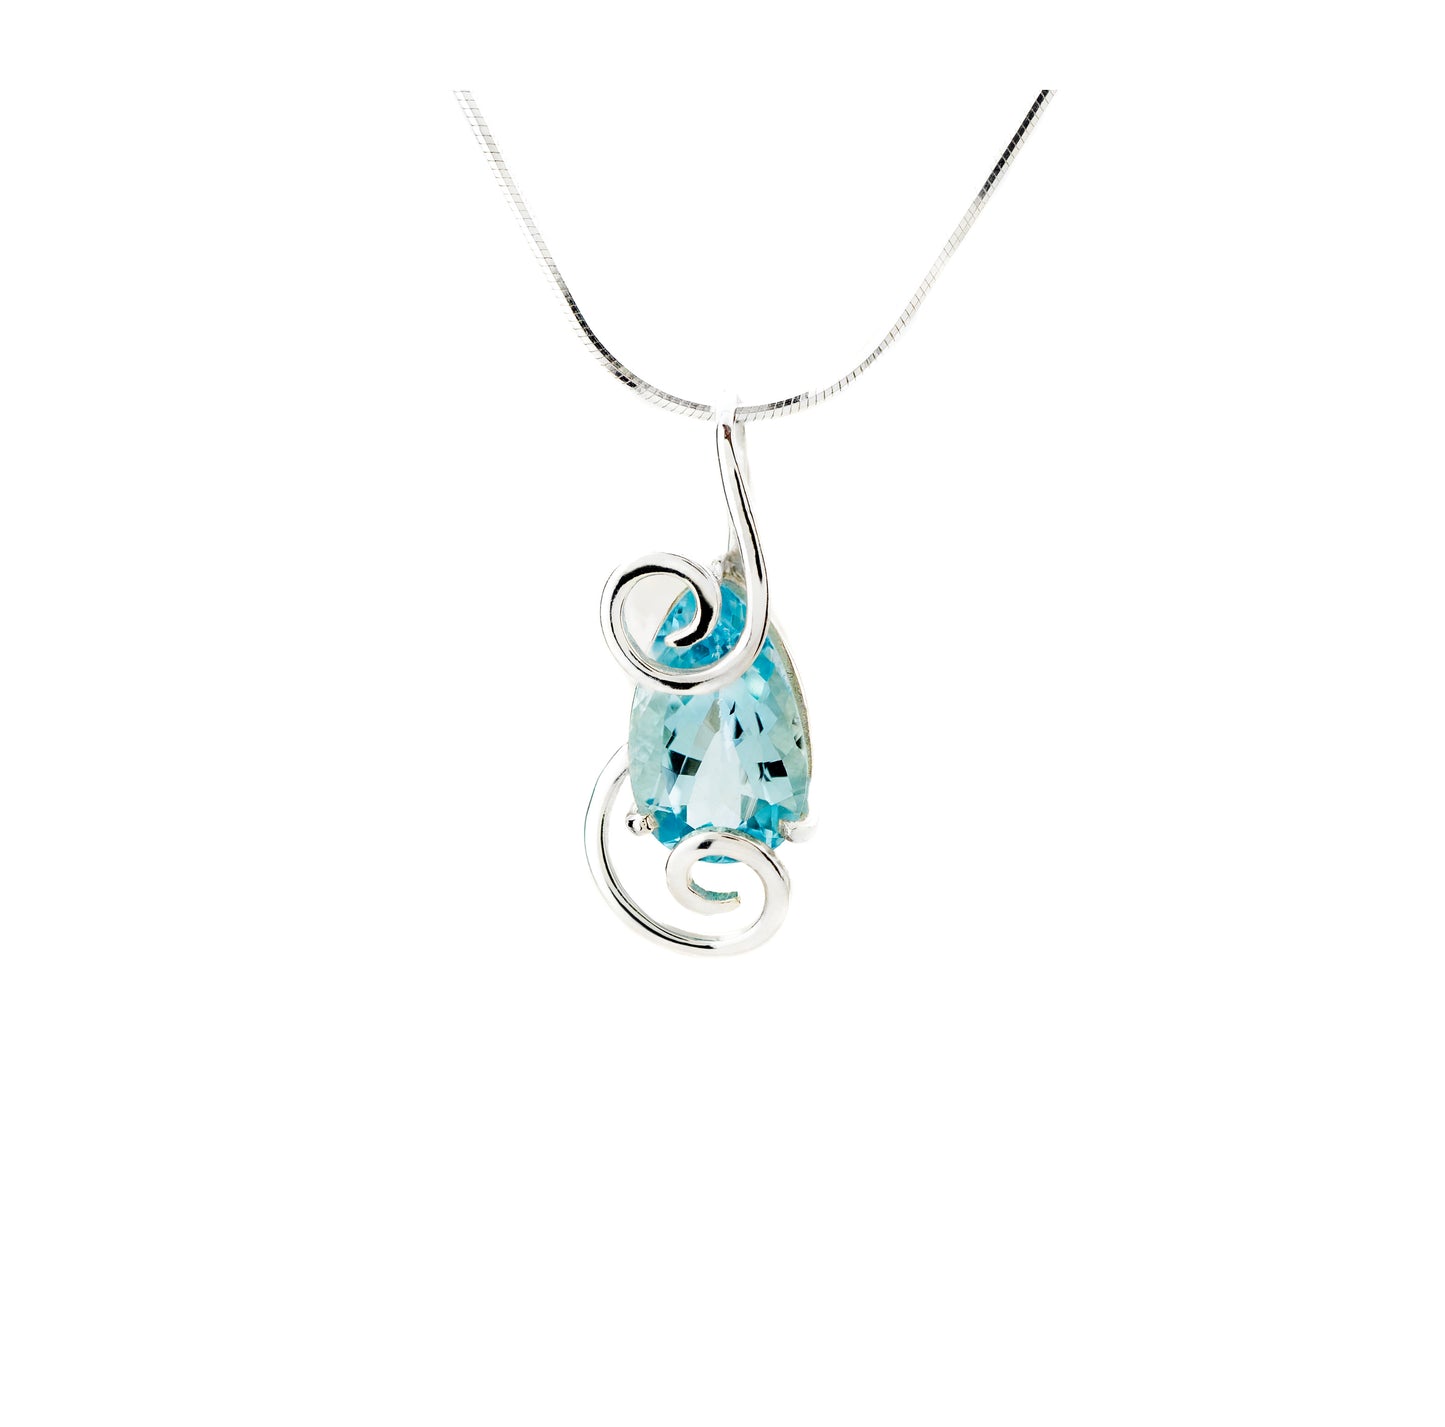 Blue Topaz Faceted Pendant Sterling Silver - Twisted Earth Artistry